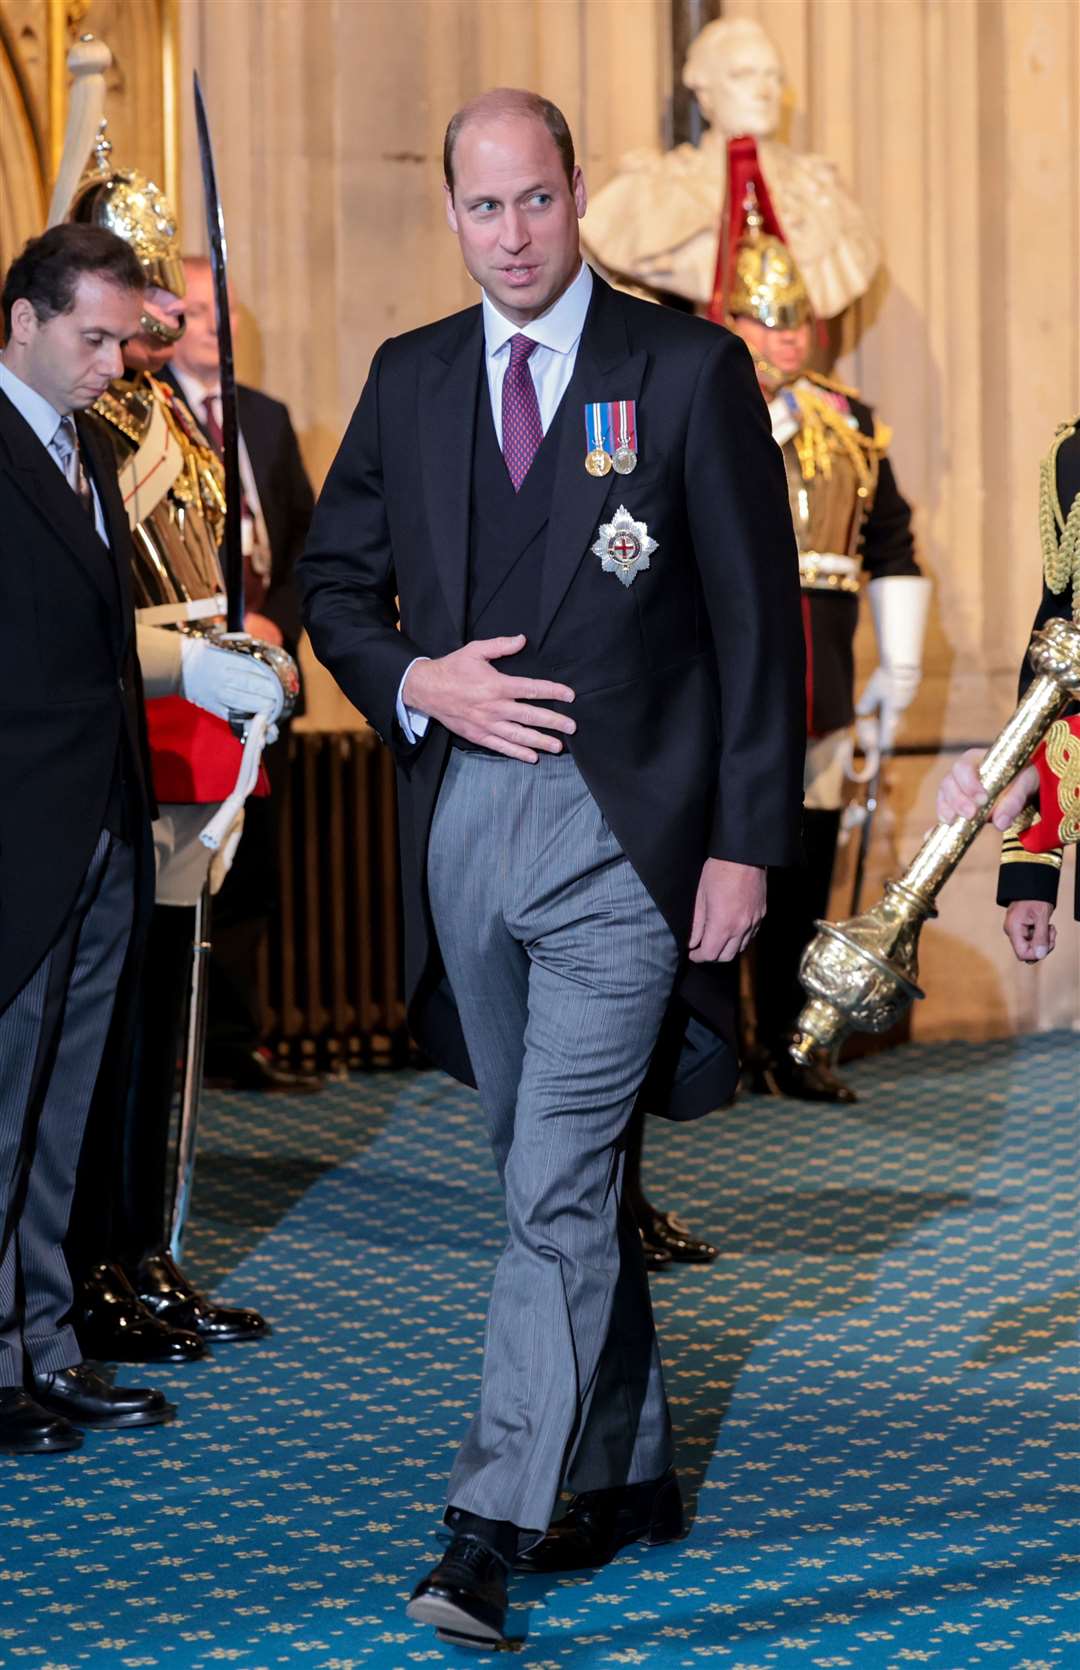 The Duke of Cambridge after attending the State Opening of Parliament (Chris Jackson/PA)